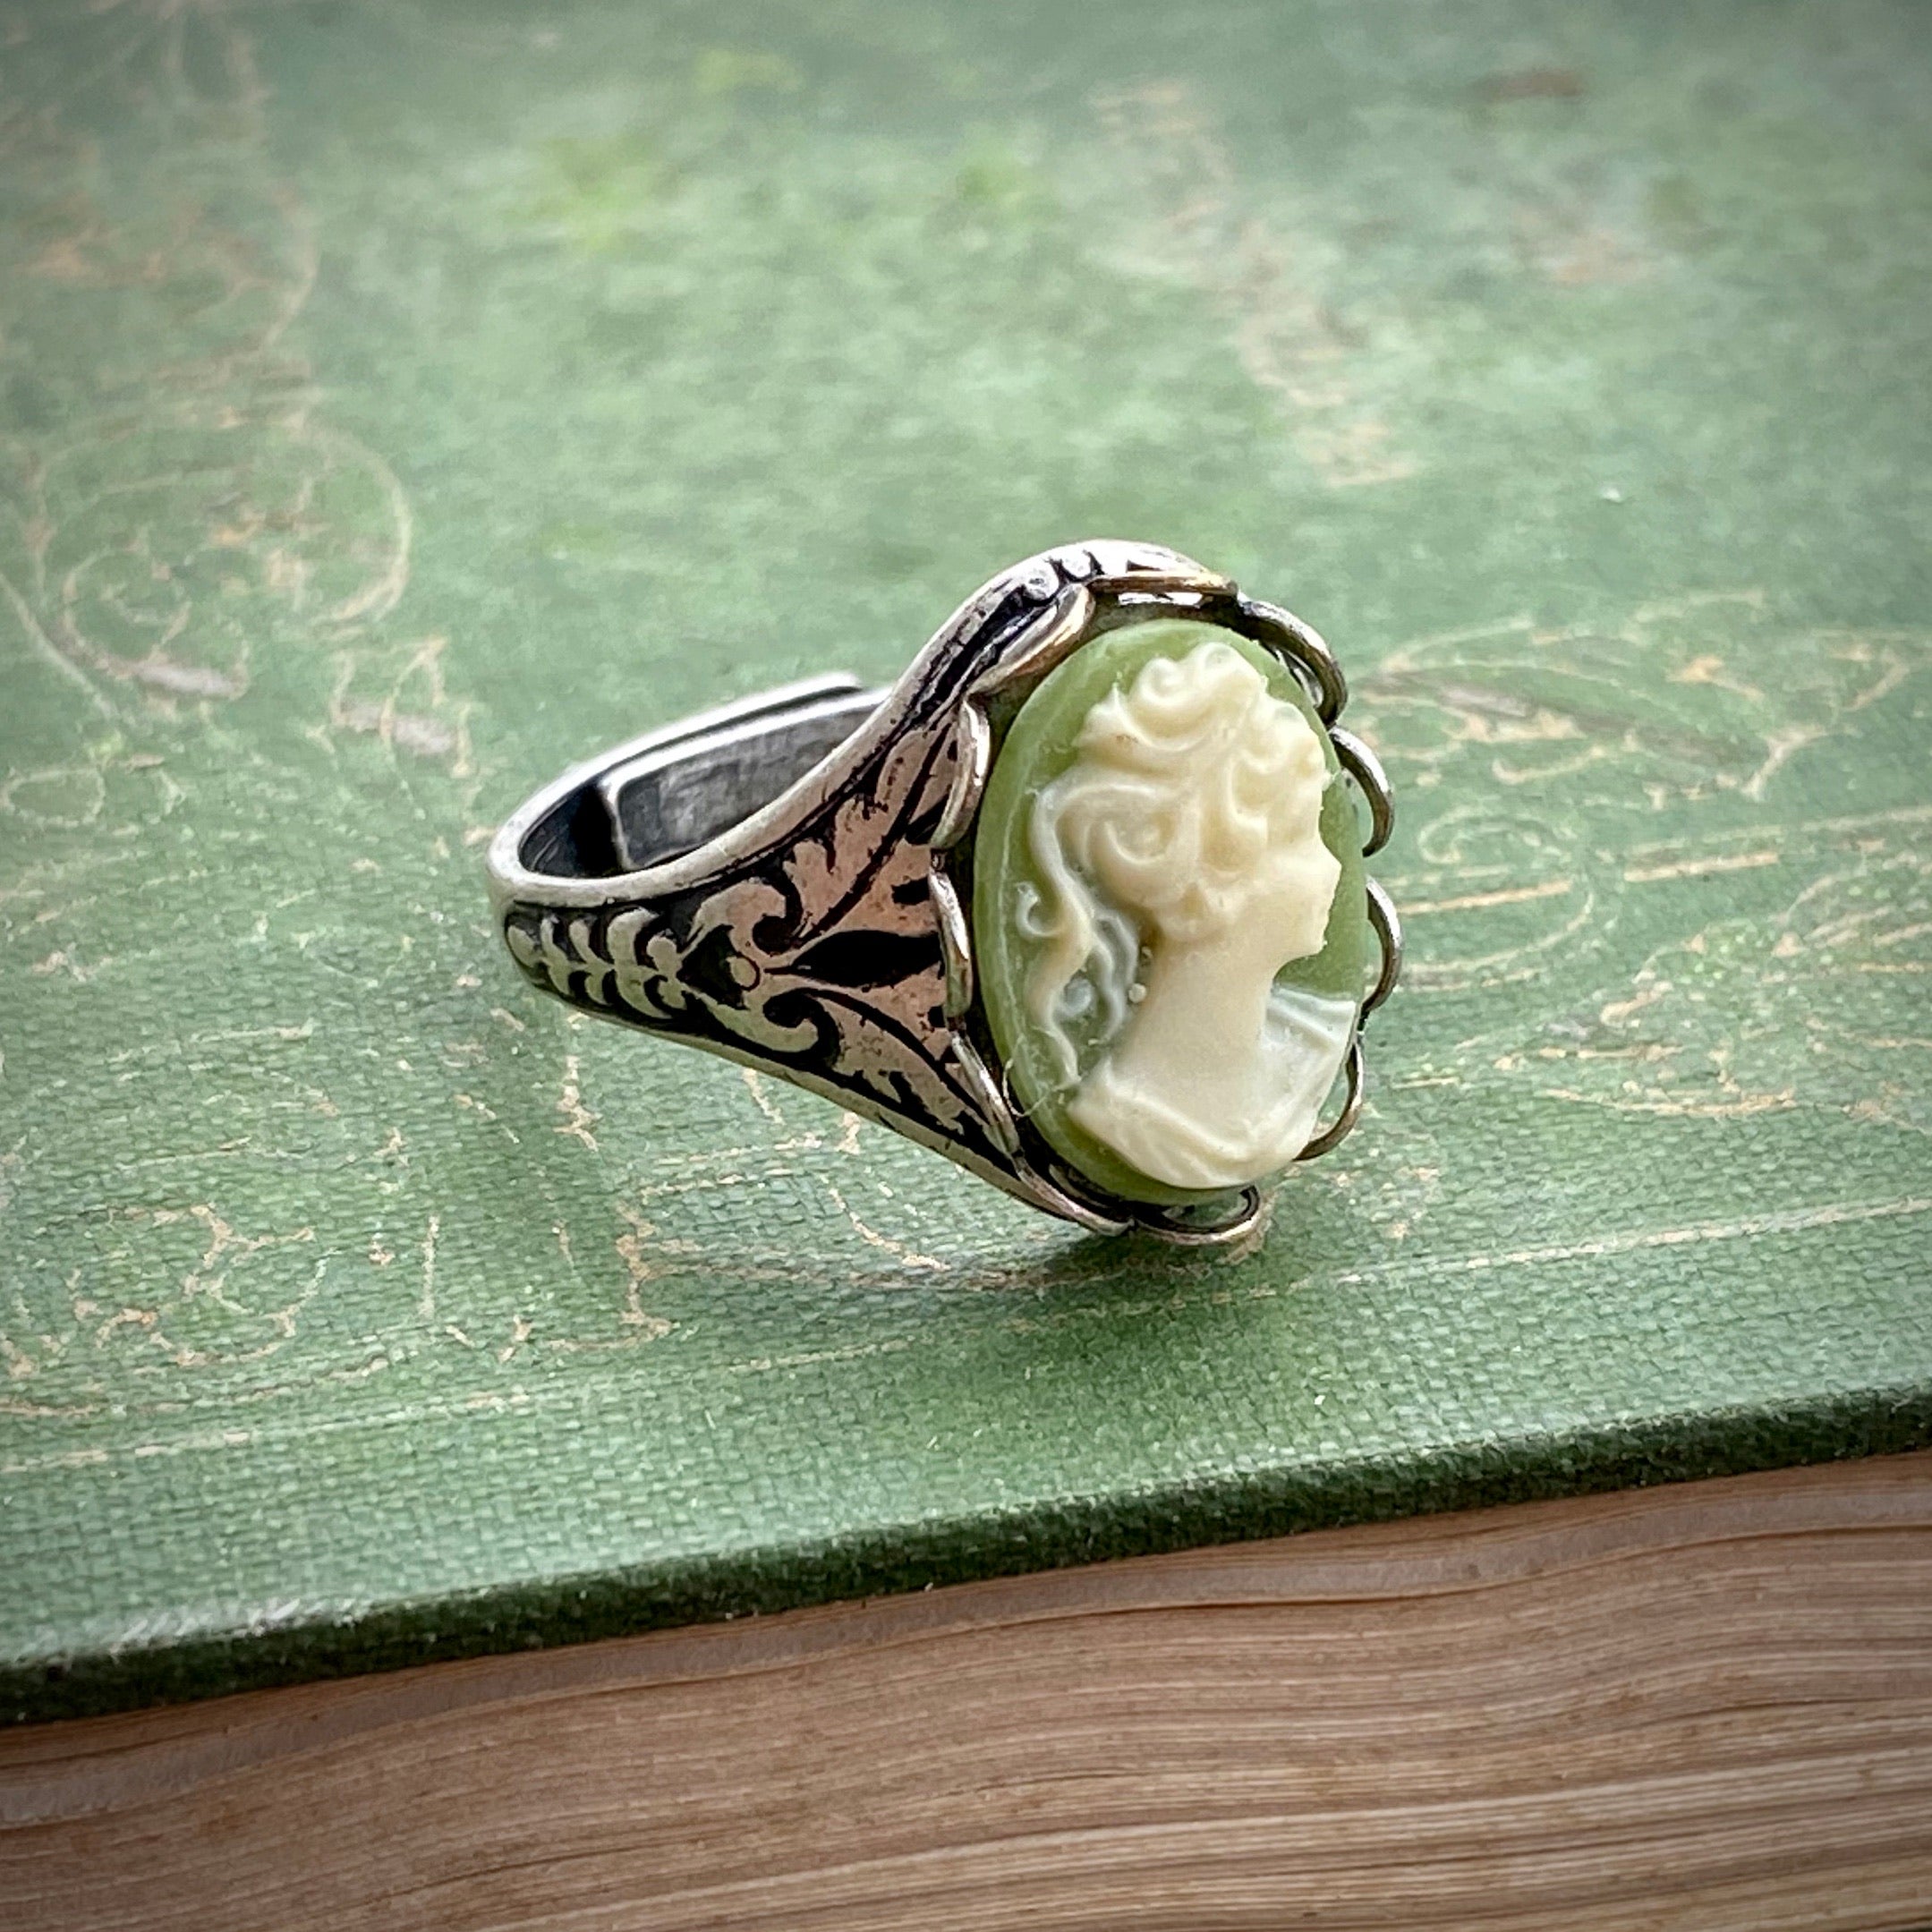 800 Grade Silver and Carnelian Cameo Ring | Collectors Weekly